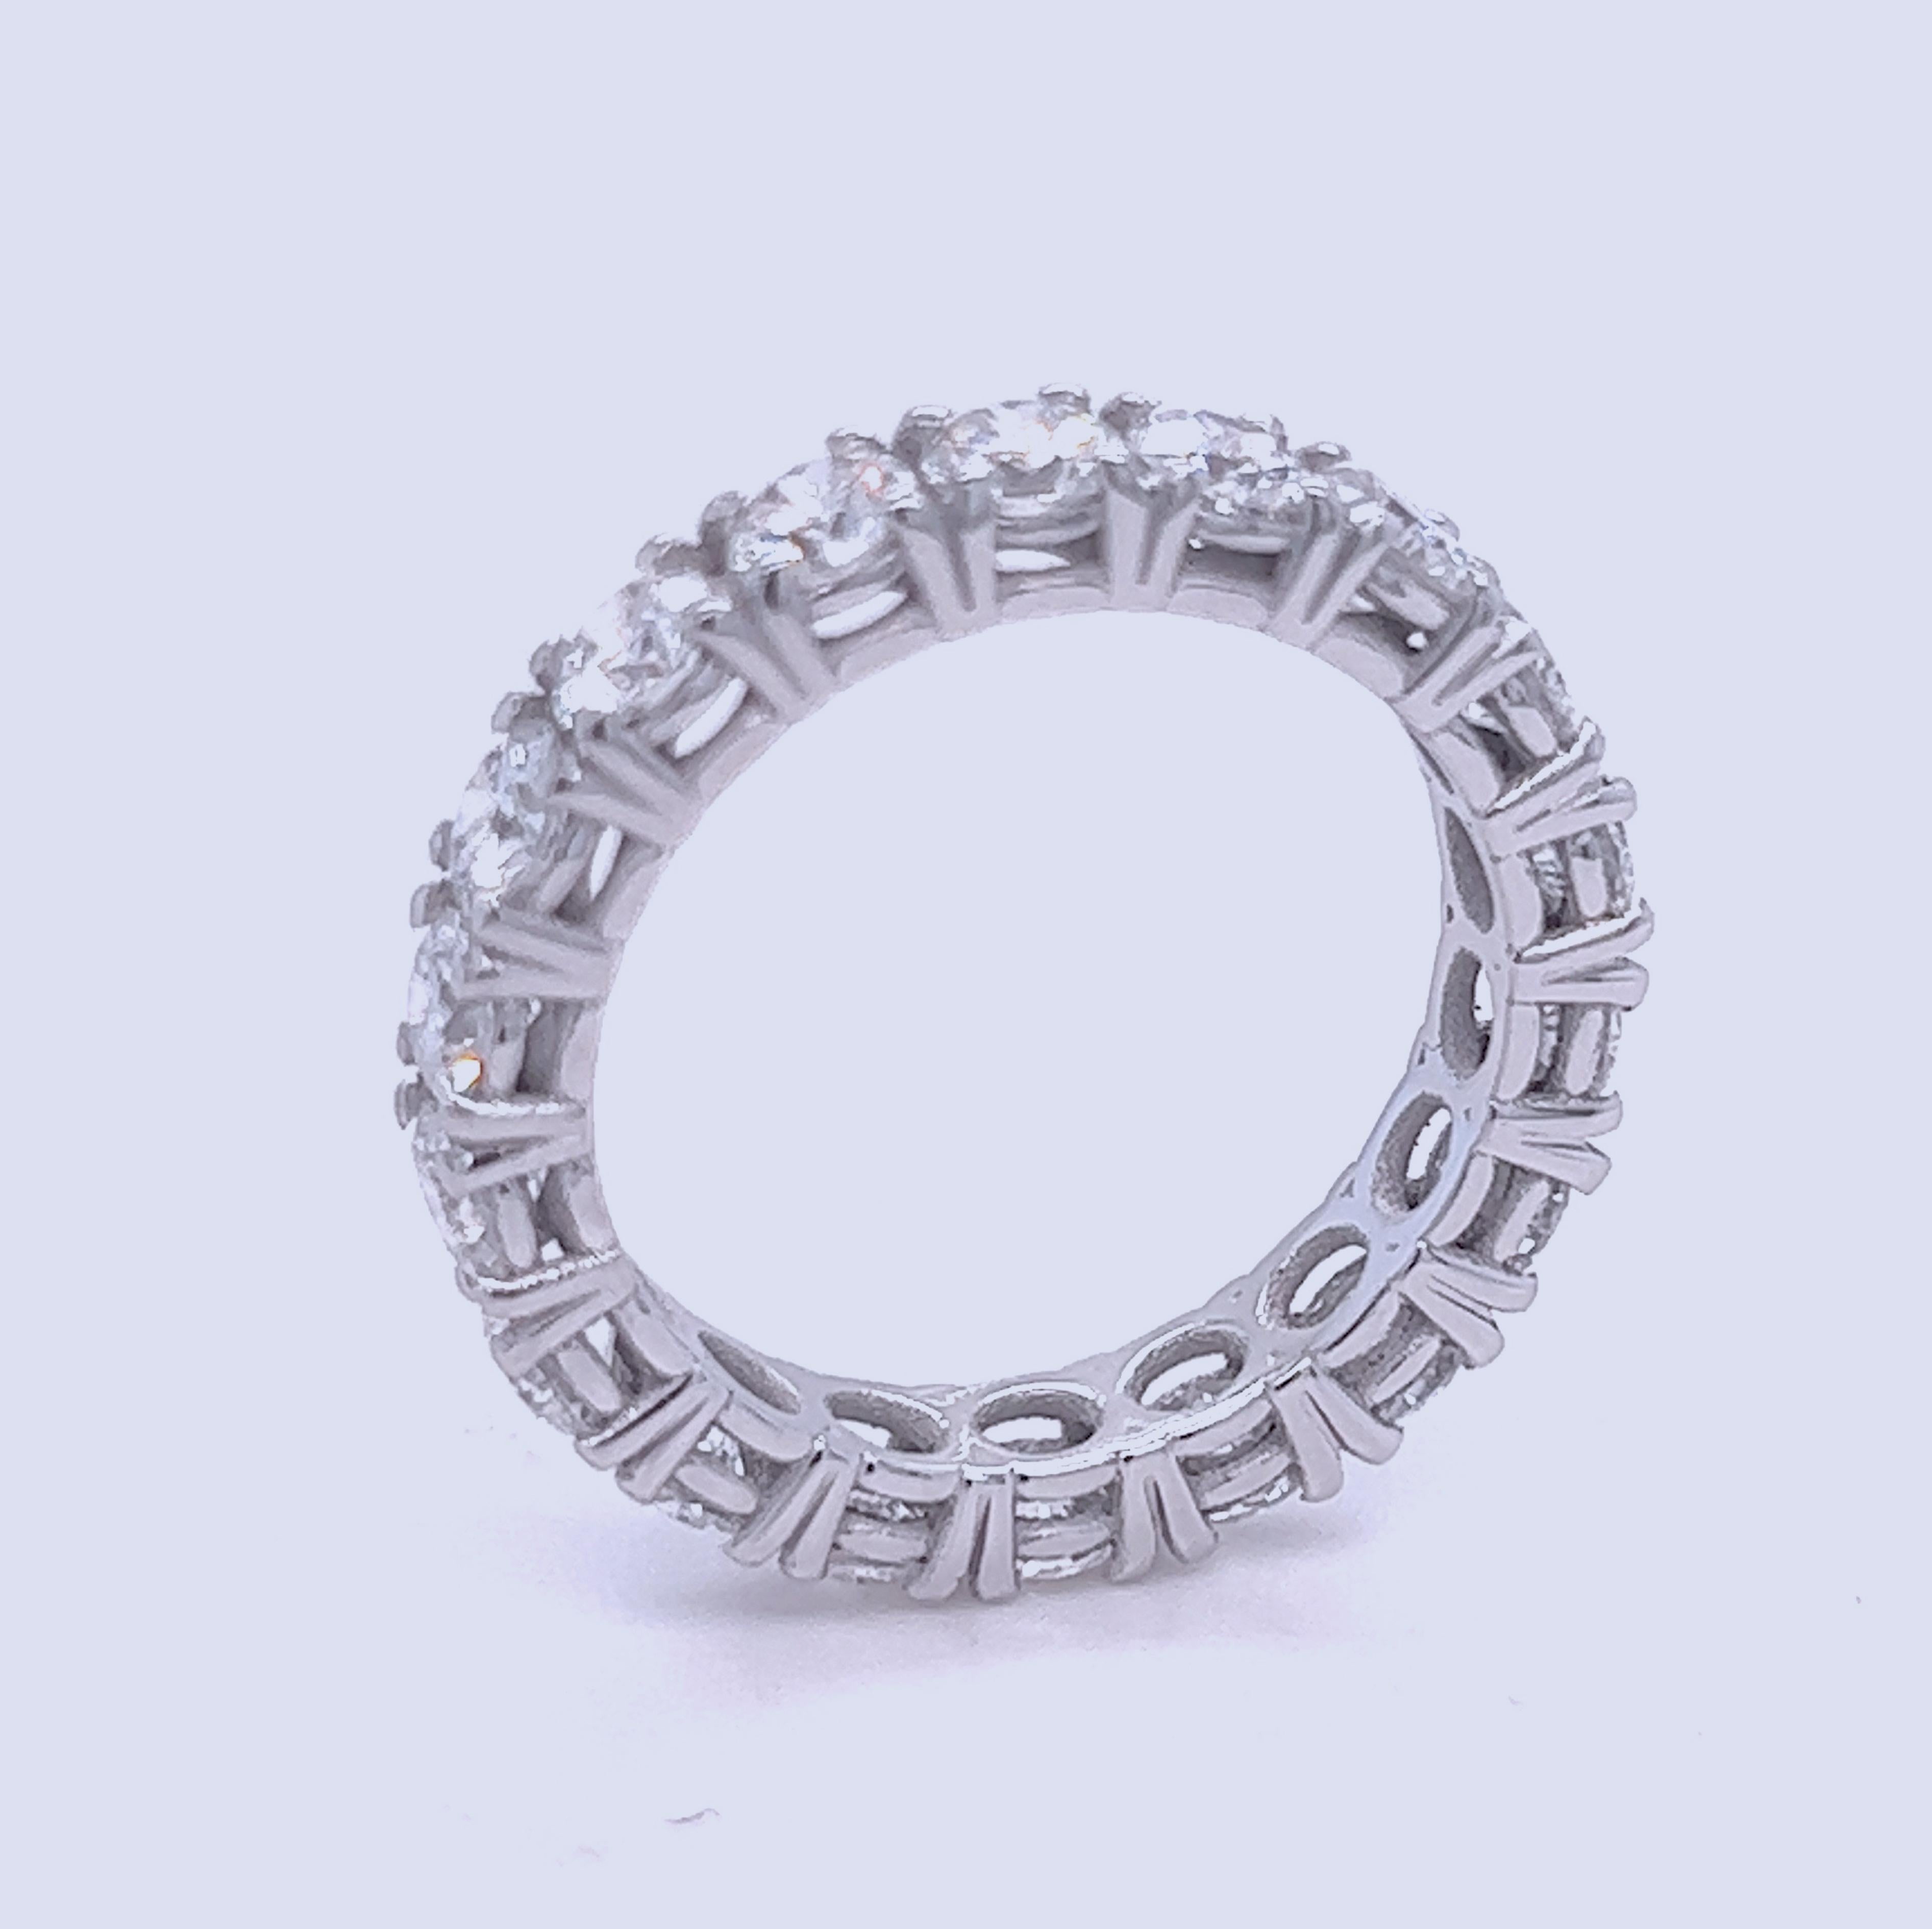 Beautifully handmade eternity wedding band featuring 18 (F-G, VvS1) round brilliant cut white diamond  for a total weight of 2.70 Carat, 18Karat white gold setting.
US Size 5 1/2
French Size 51
We are pleased to offer complimentary resizing to size